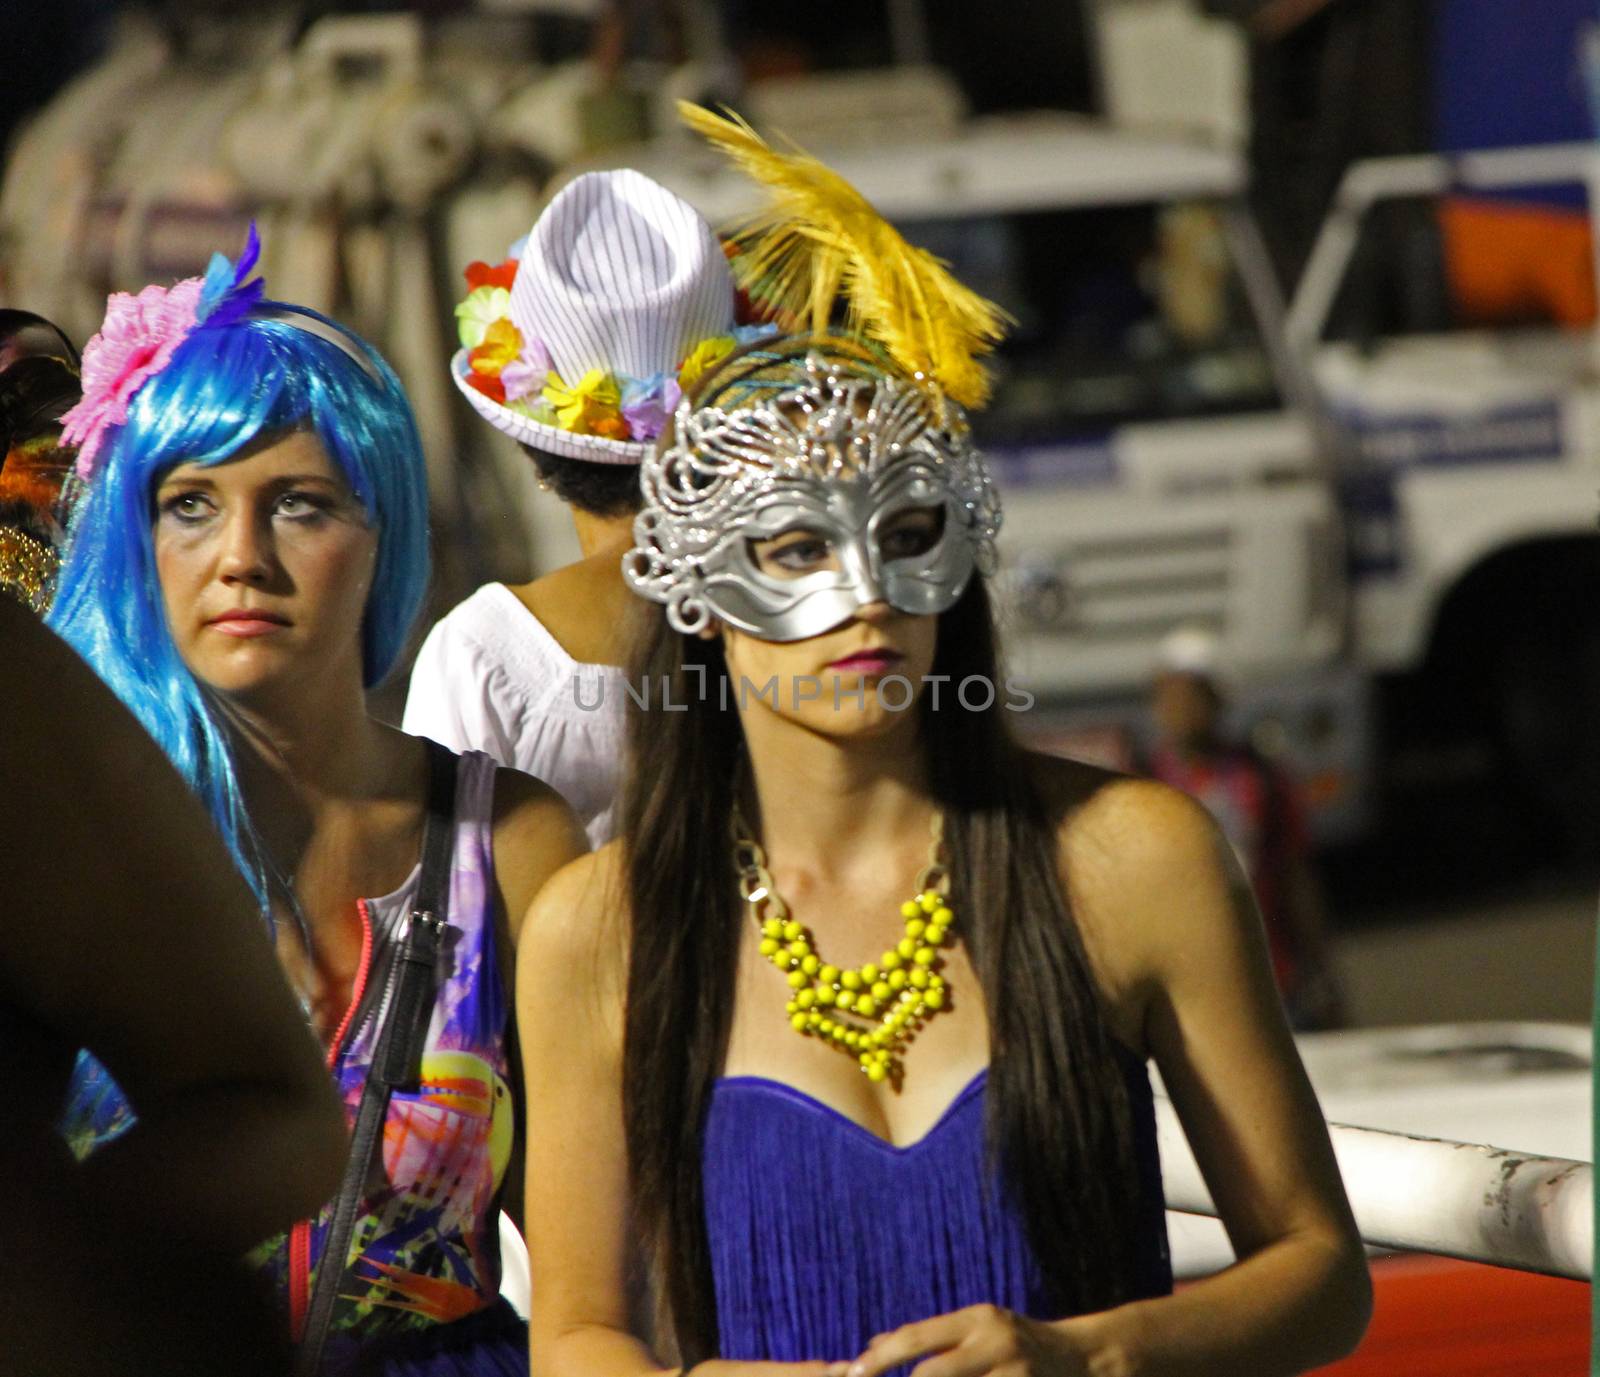 Entertainers at a carnaval in Rio de Janeiro, Brazil
02 Mar 2014
No model release
Editorial only